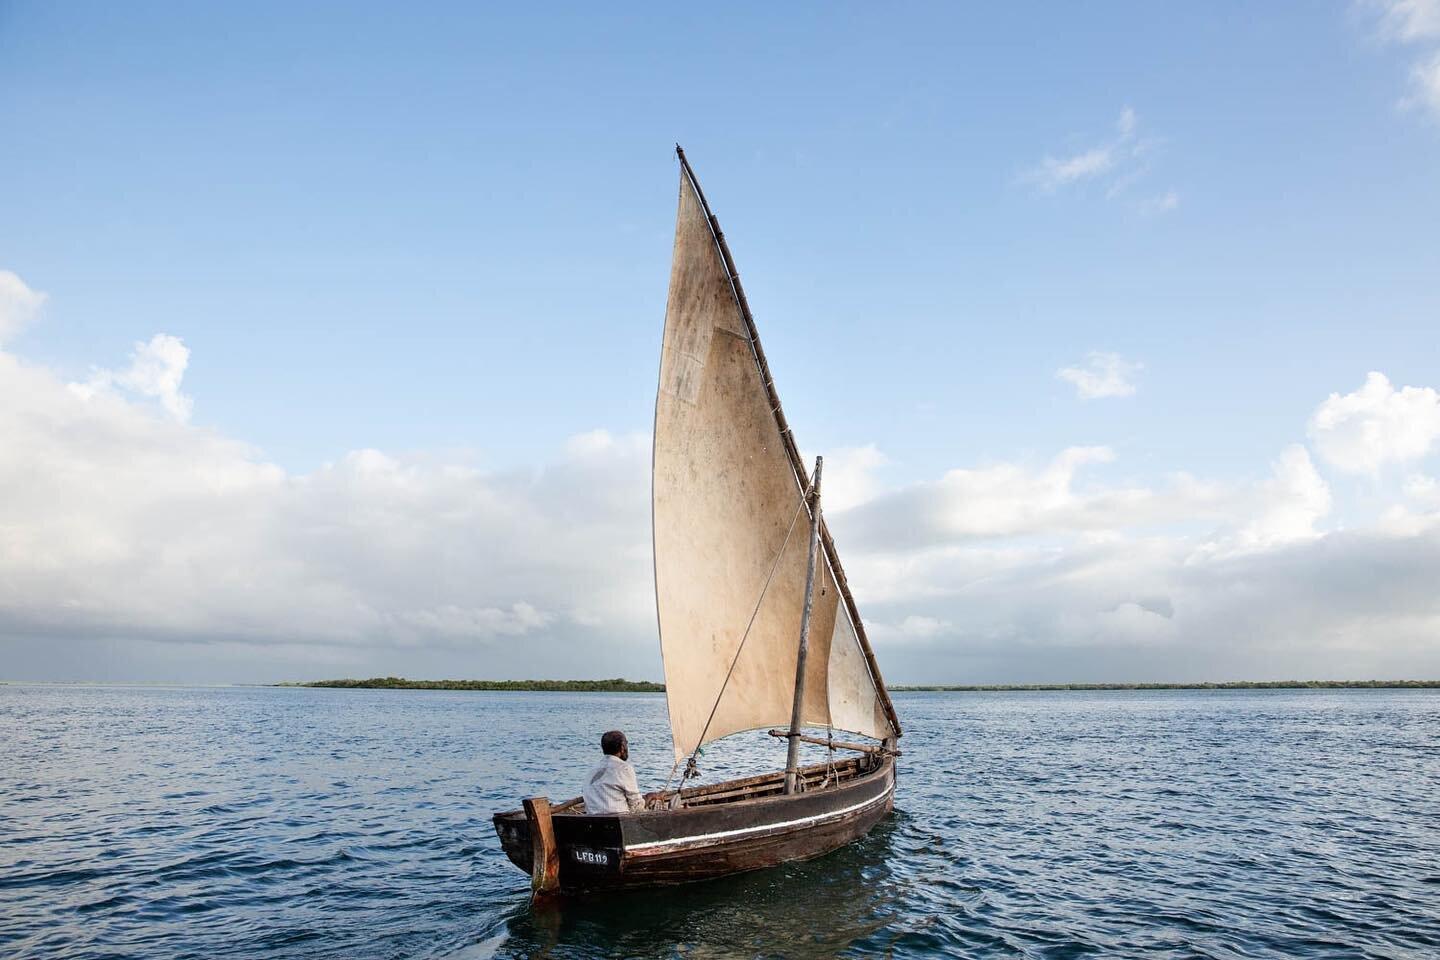 Every day, long before the sun rises, Ahmed Bob (Babu&rsquo;s father) sails the Indian Ocean to catch his daily bread. Babu is born in a family of fishermen, using traditional techniques for sustainable fishing. #lamuisland #visitlamu #sustainablefoo